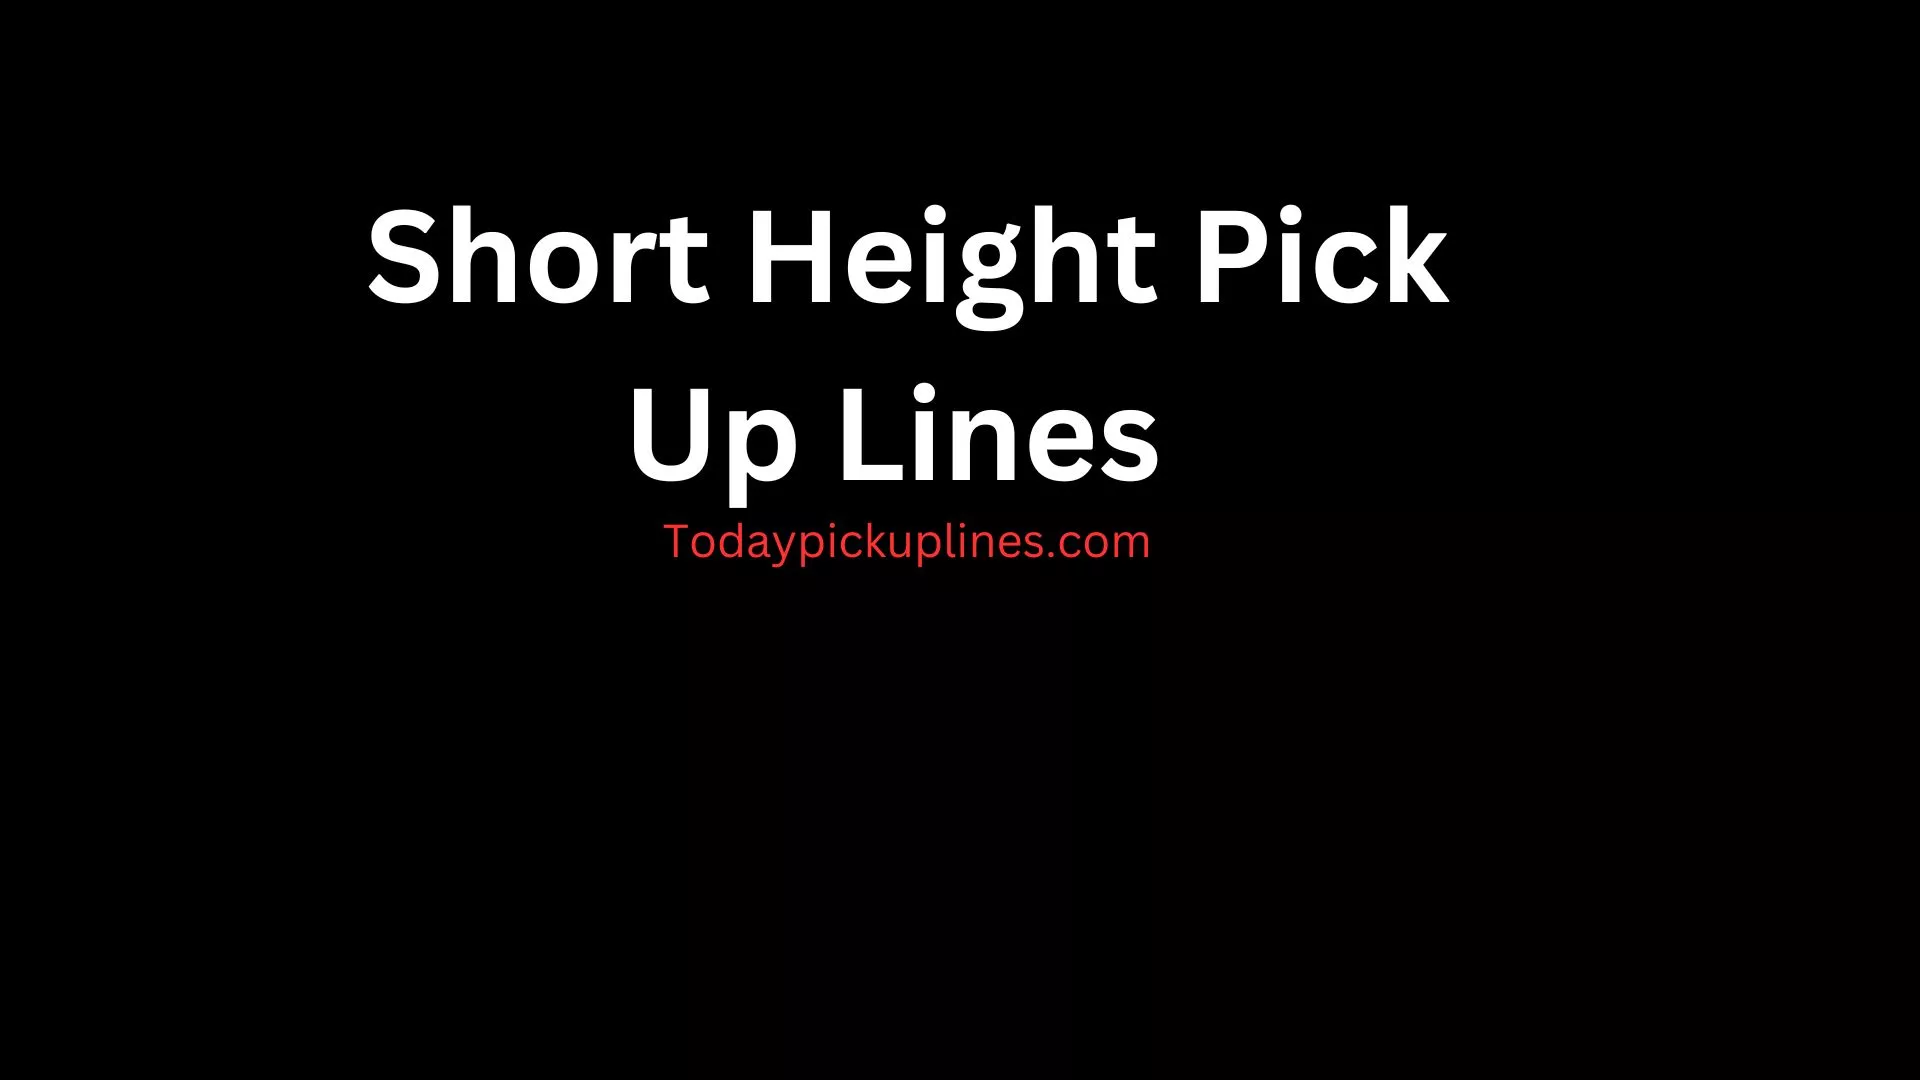 Short Height Pick Up Lines